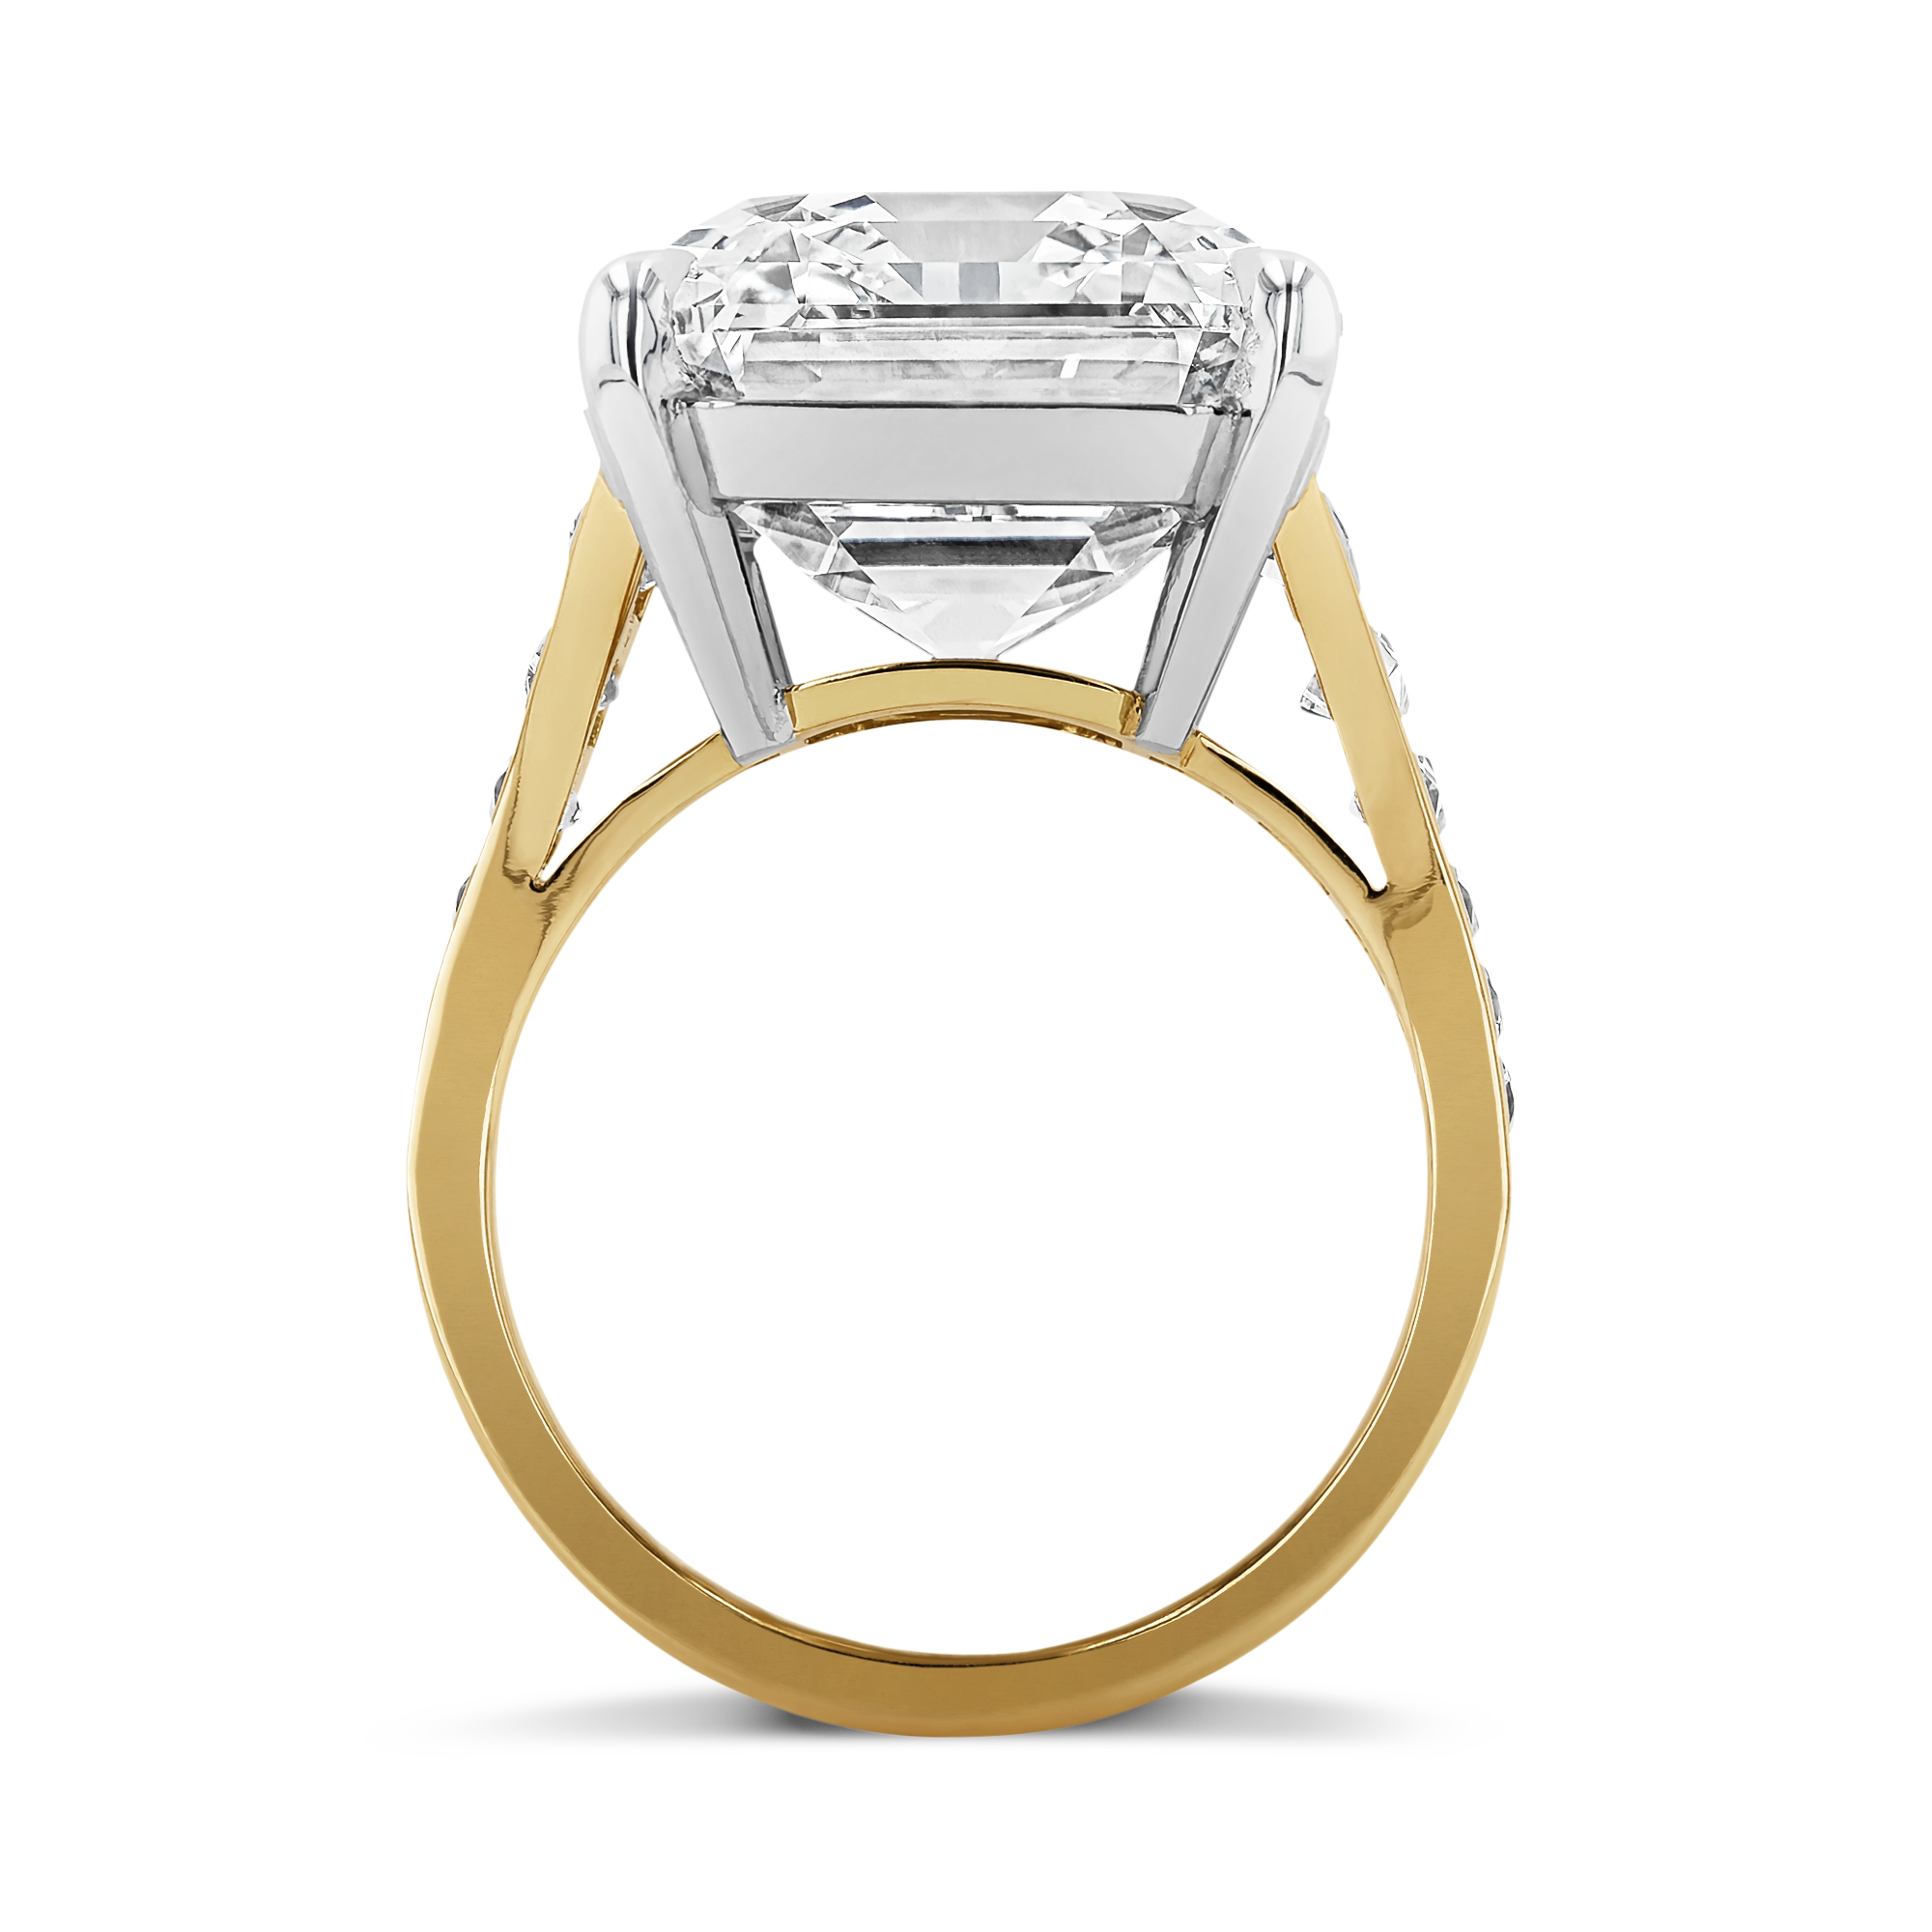 Masterpiece Pragnell Setting 17.26ct Diamond Solitaire Ring Emerald Cut, Claw Set_3